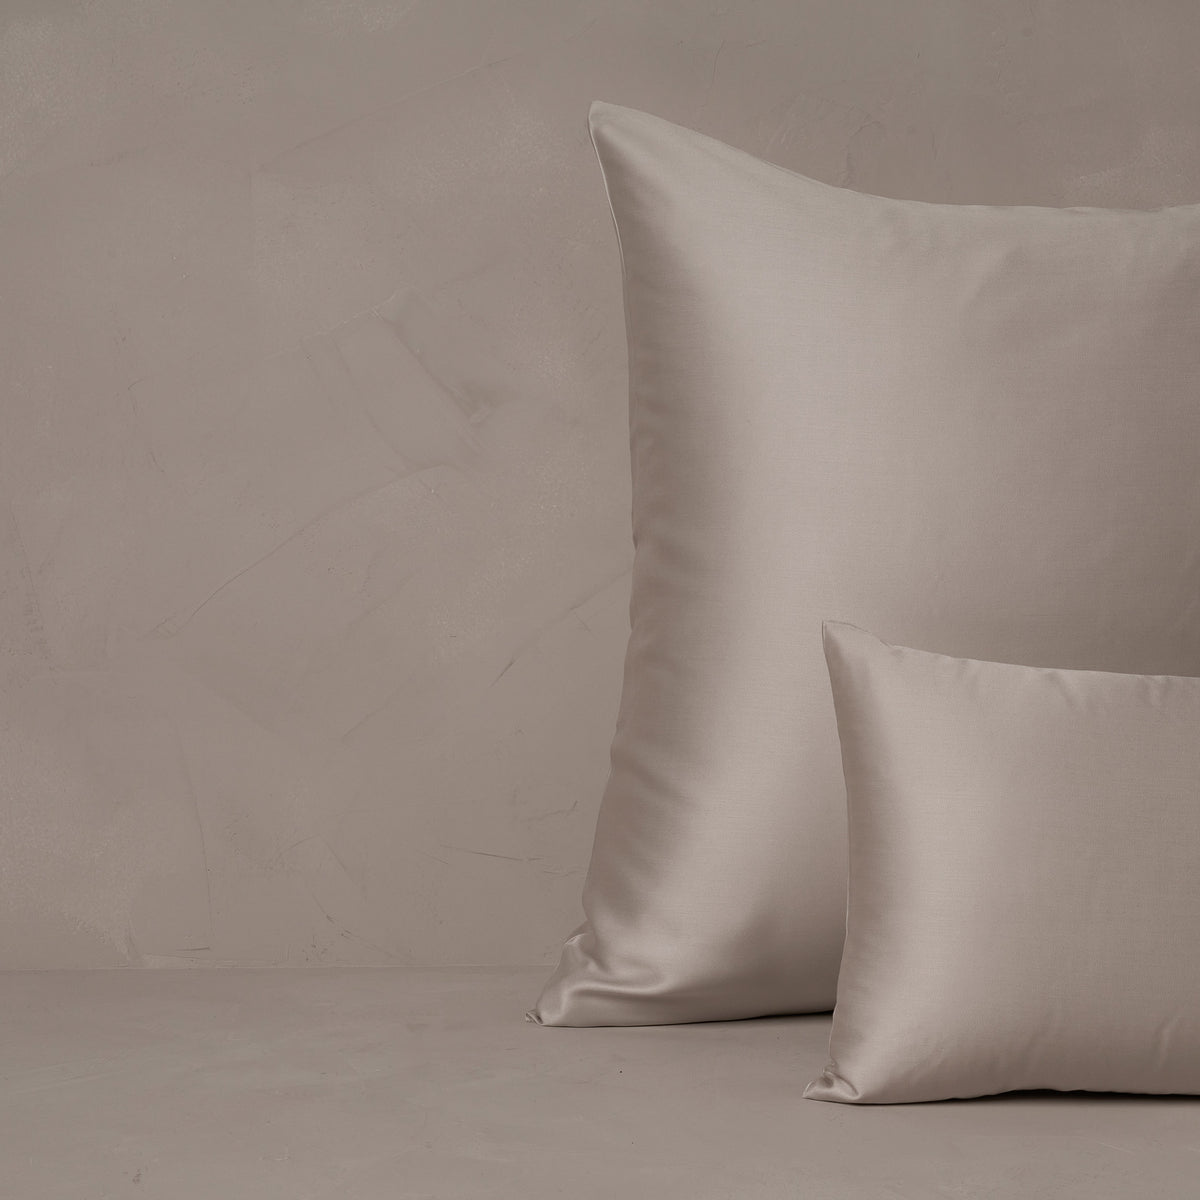 An image of a small boudoir or travel size pillow stacked in front of a large euro size pillow. The pillow cases are made in Italy of LETTO Woodland Silk fabric in color gray, a smooth and silky beechwood modal. data-image-id=